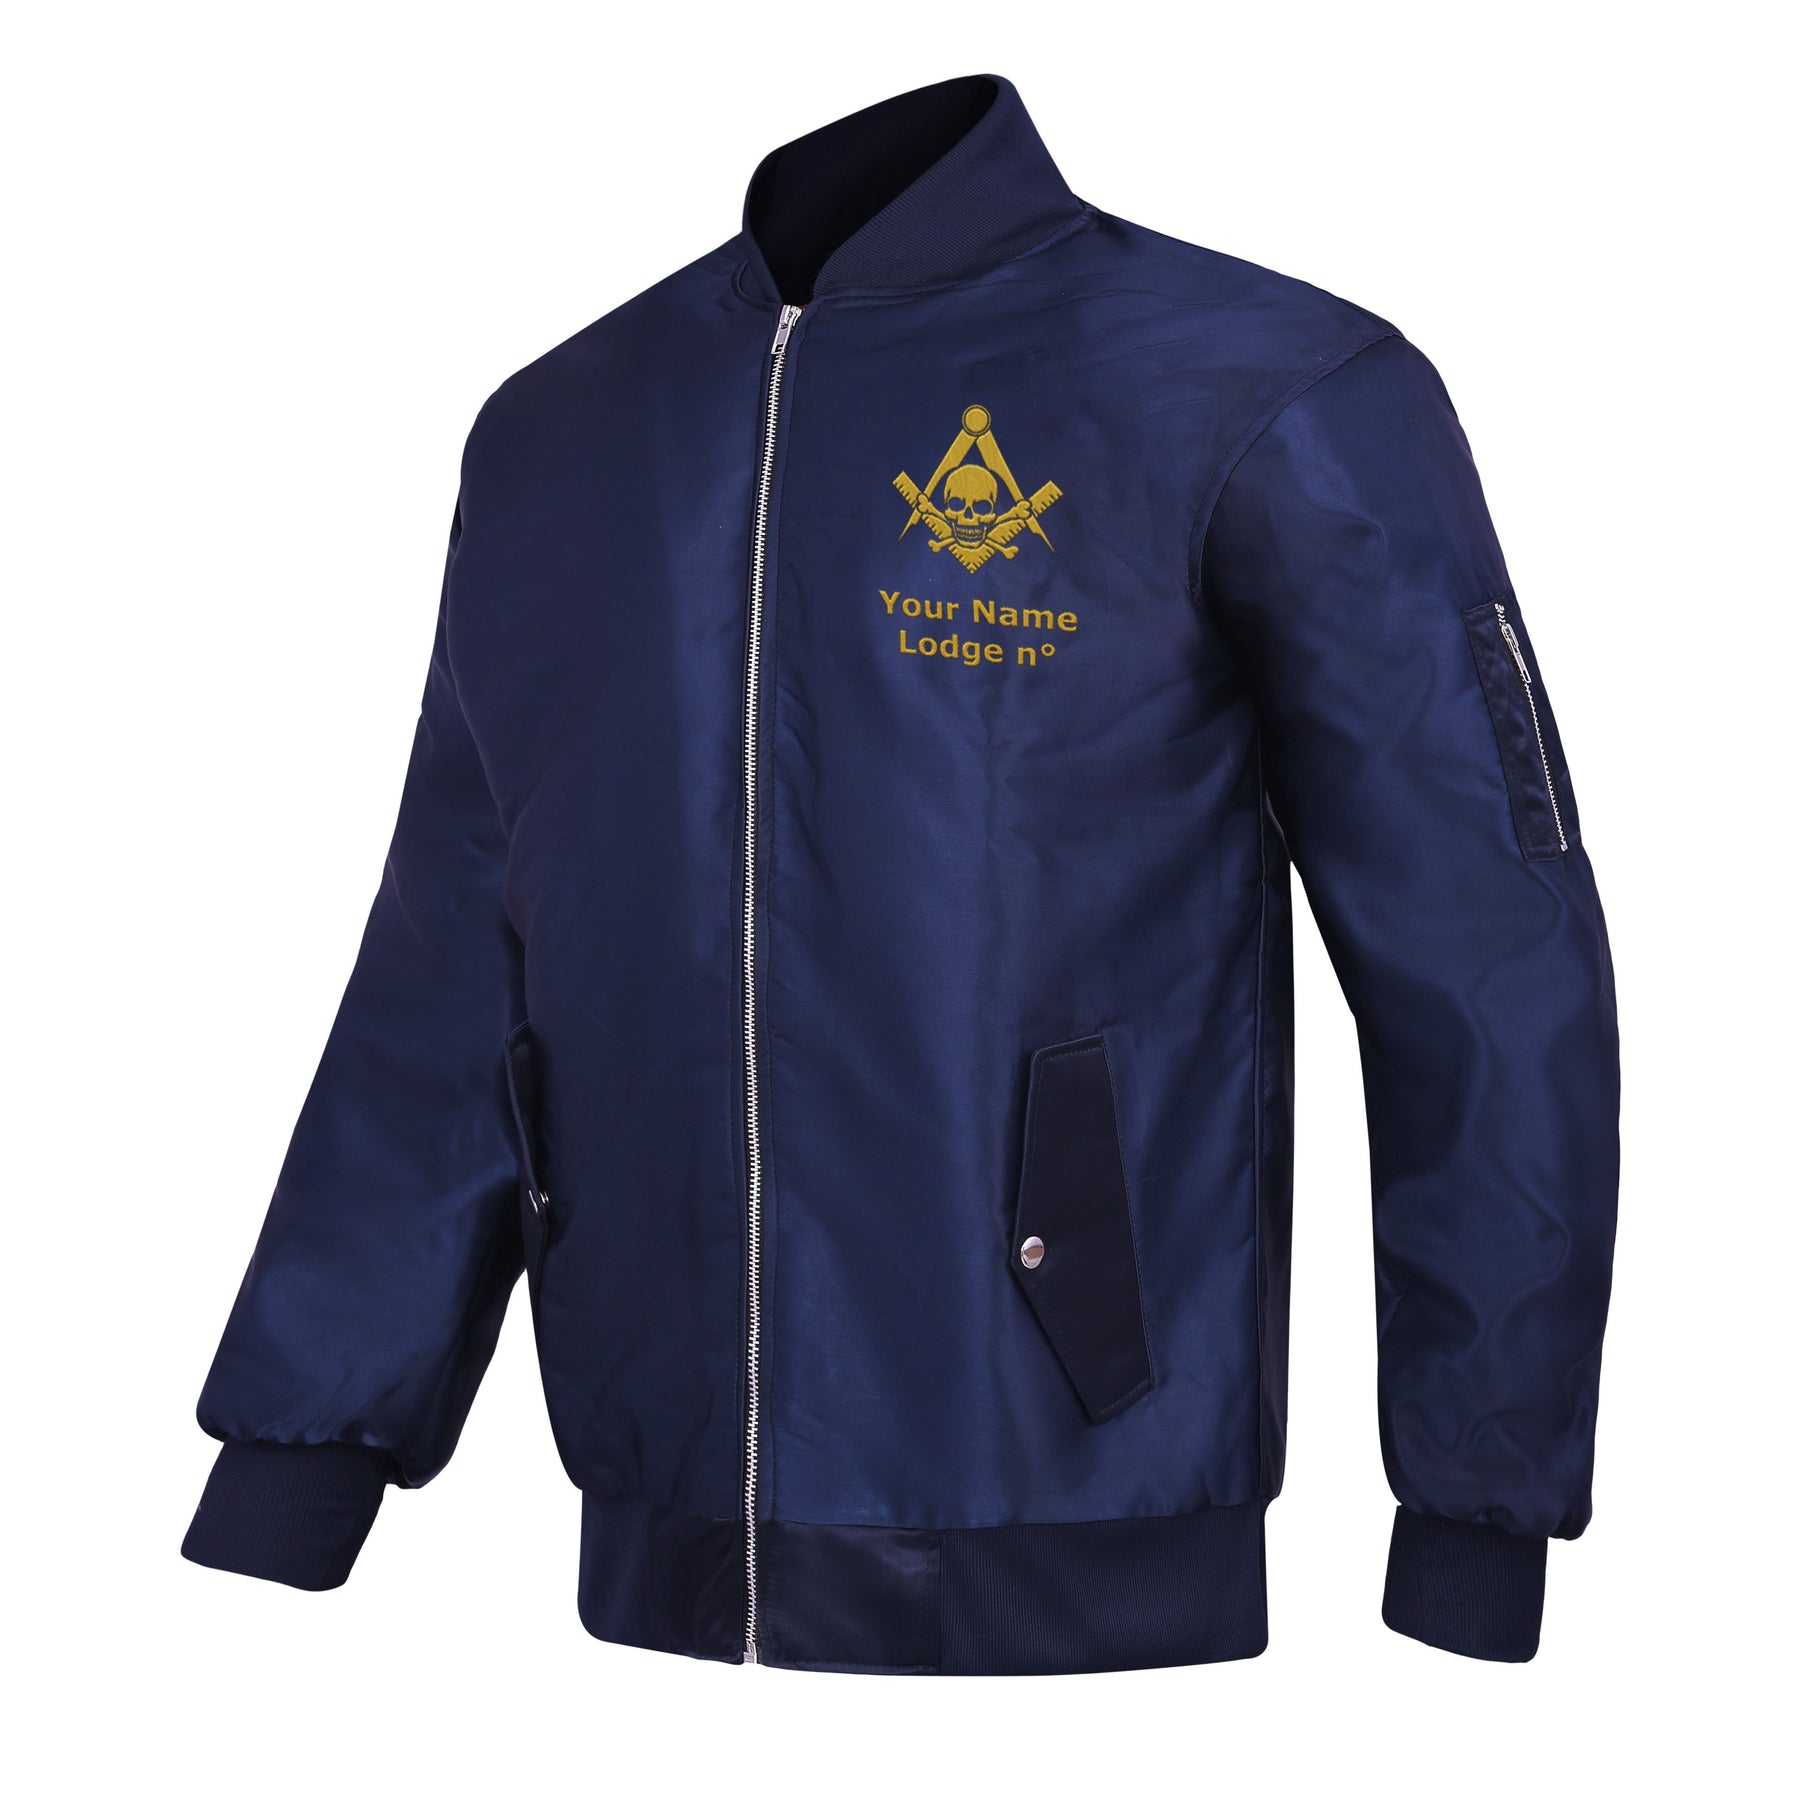 Widows Sons Jacket - Blue Color With Gold Embroidery - Bricks Masons